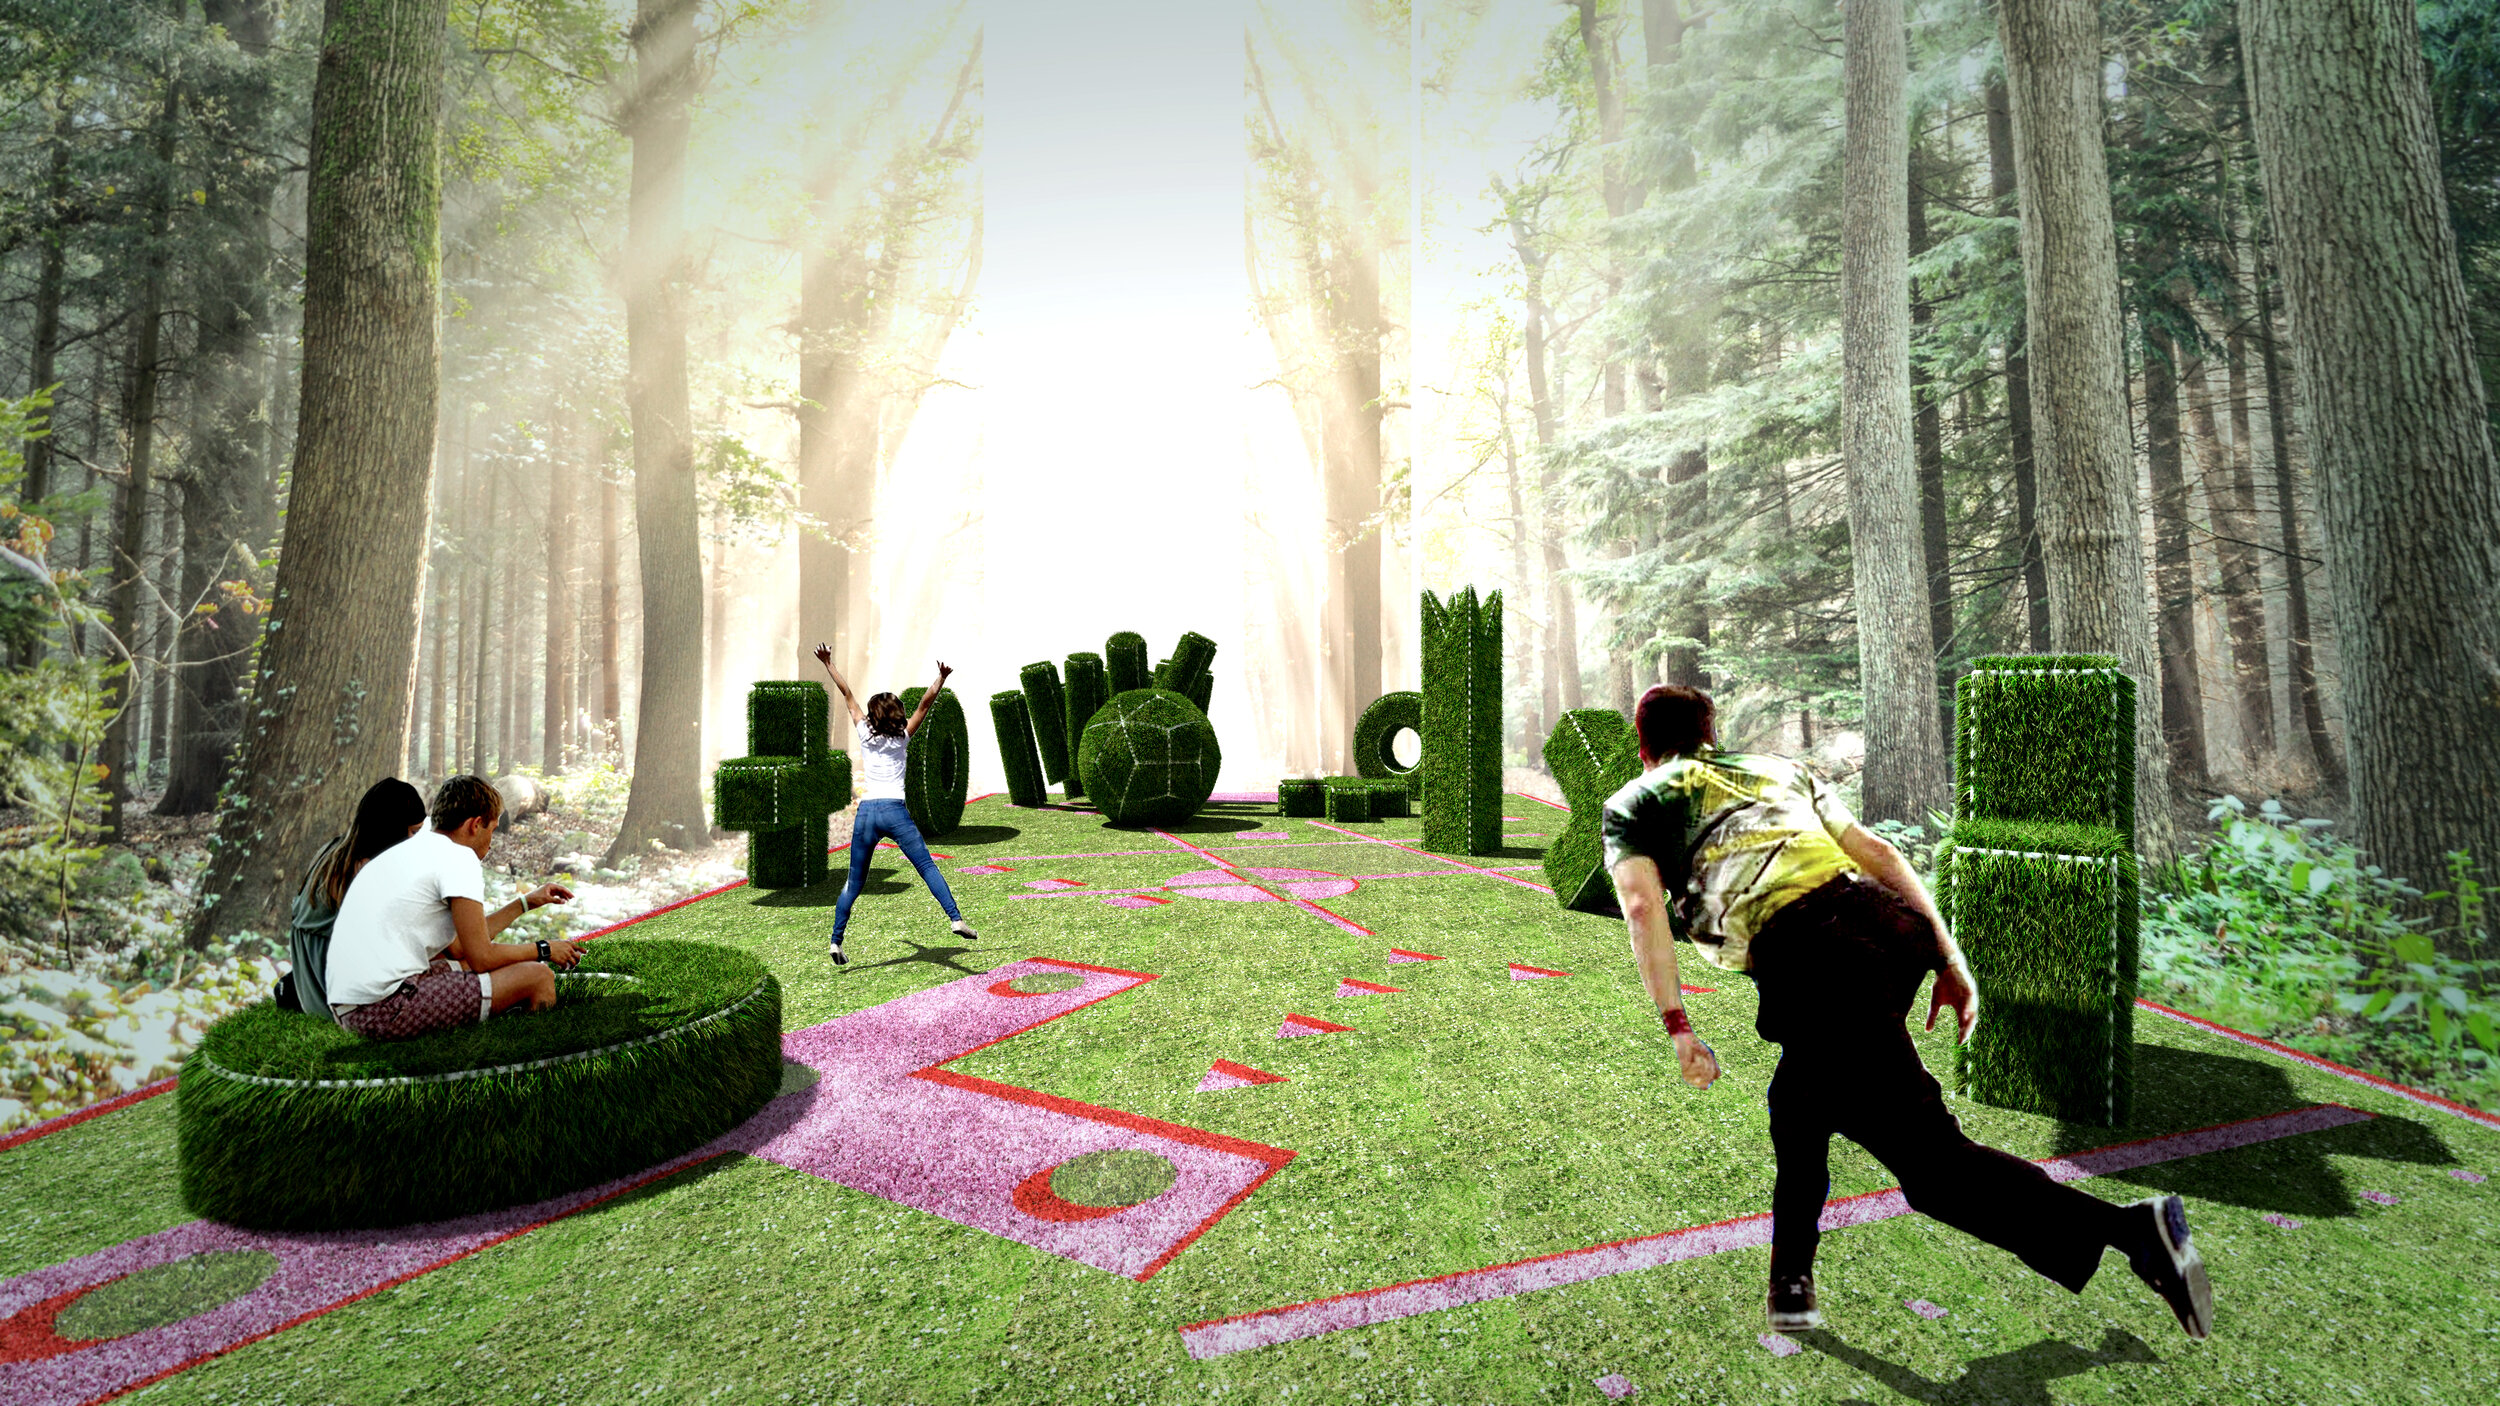 LawnGames_Image1.jpg